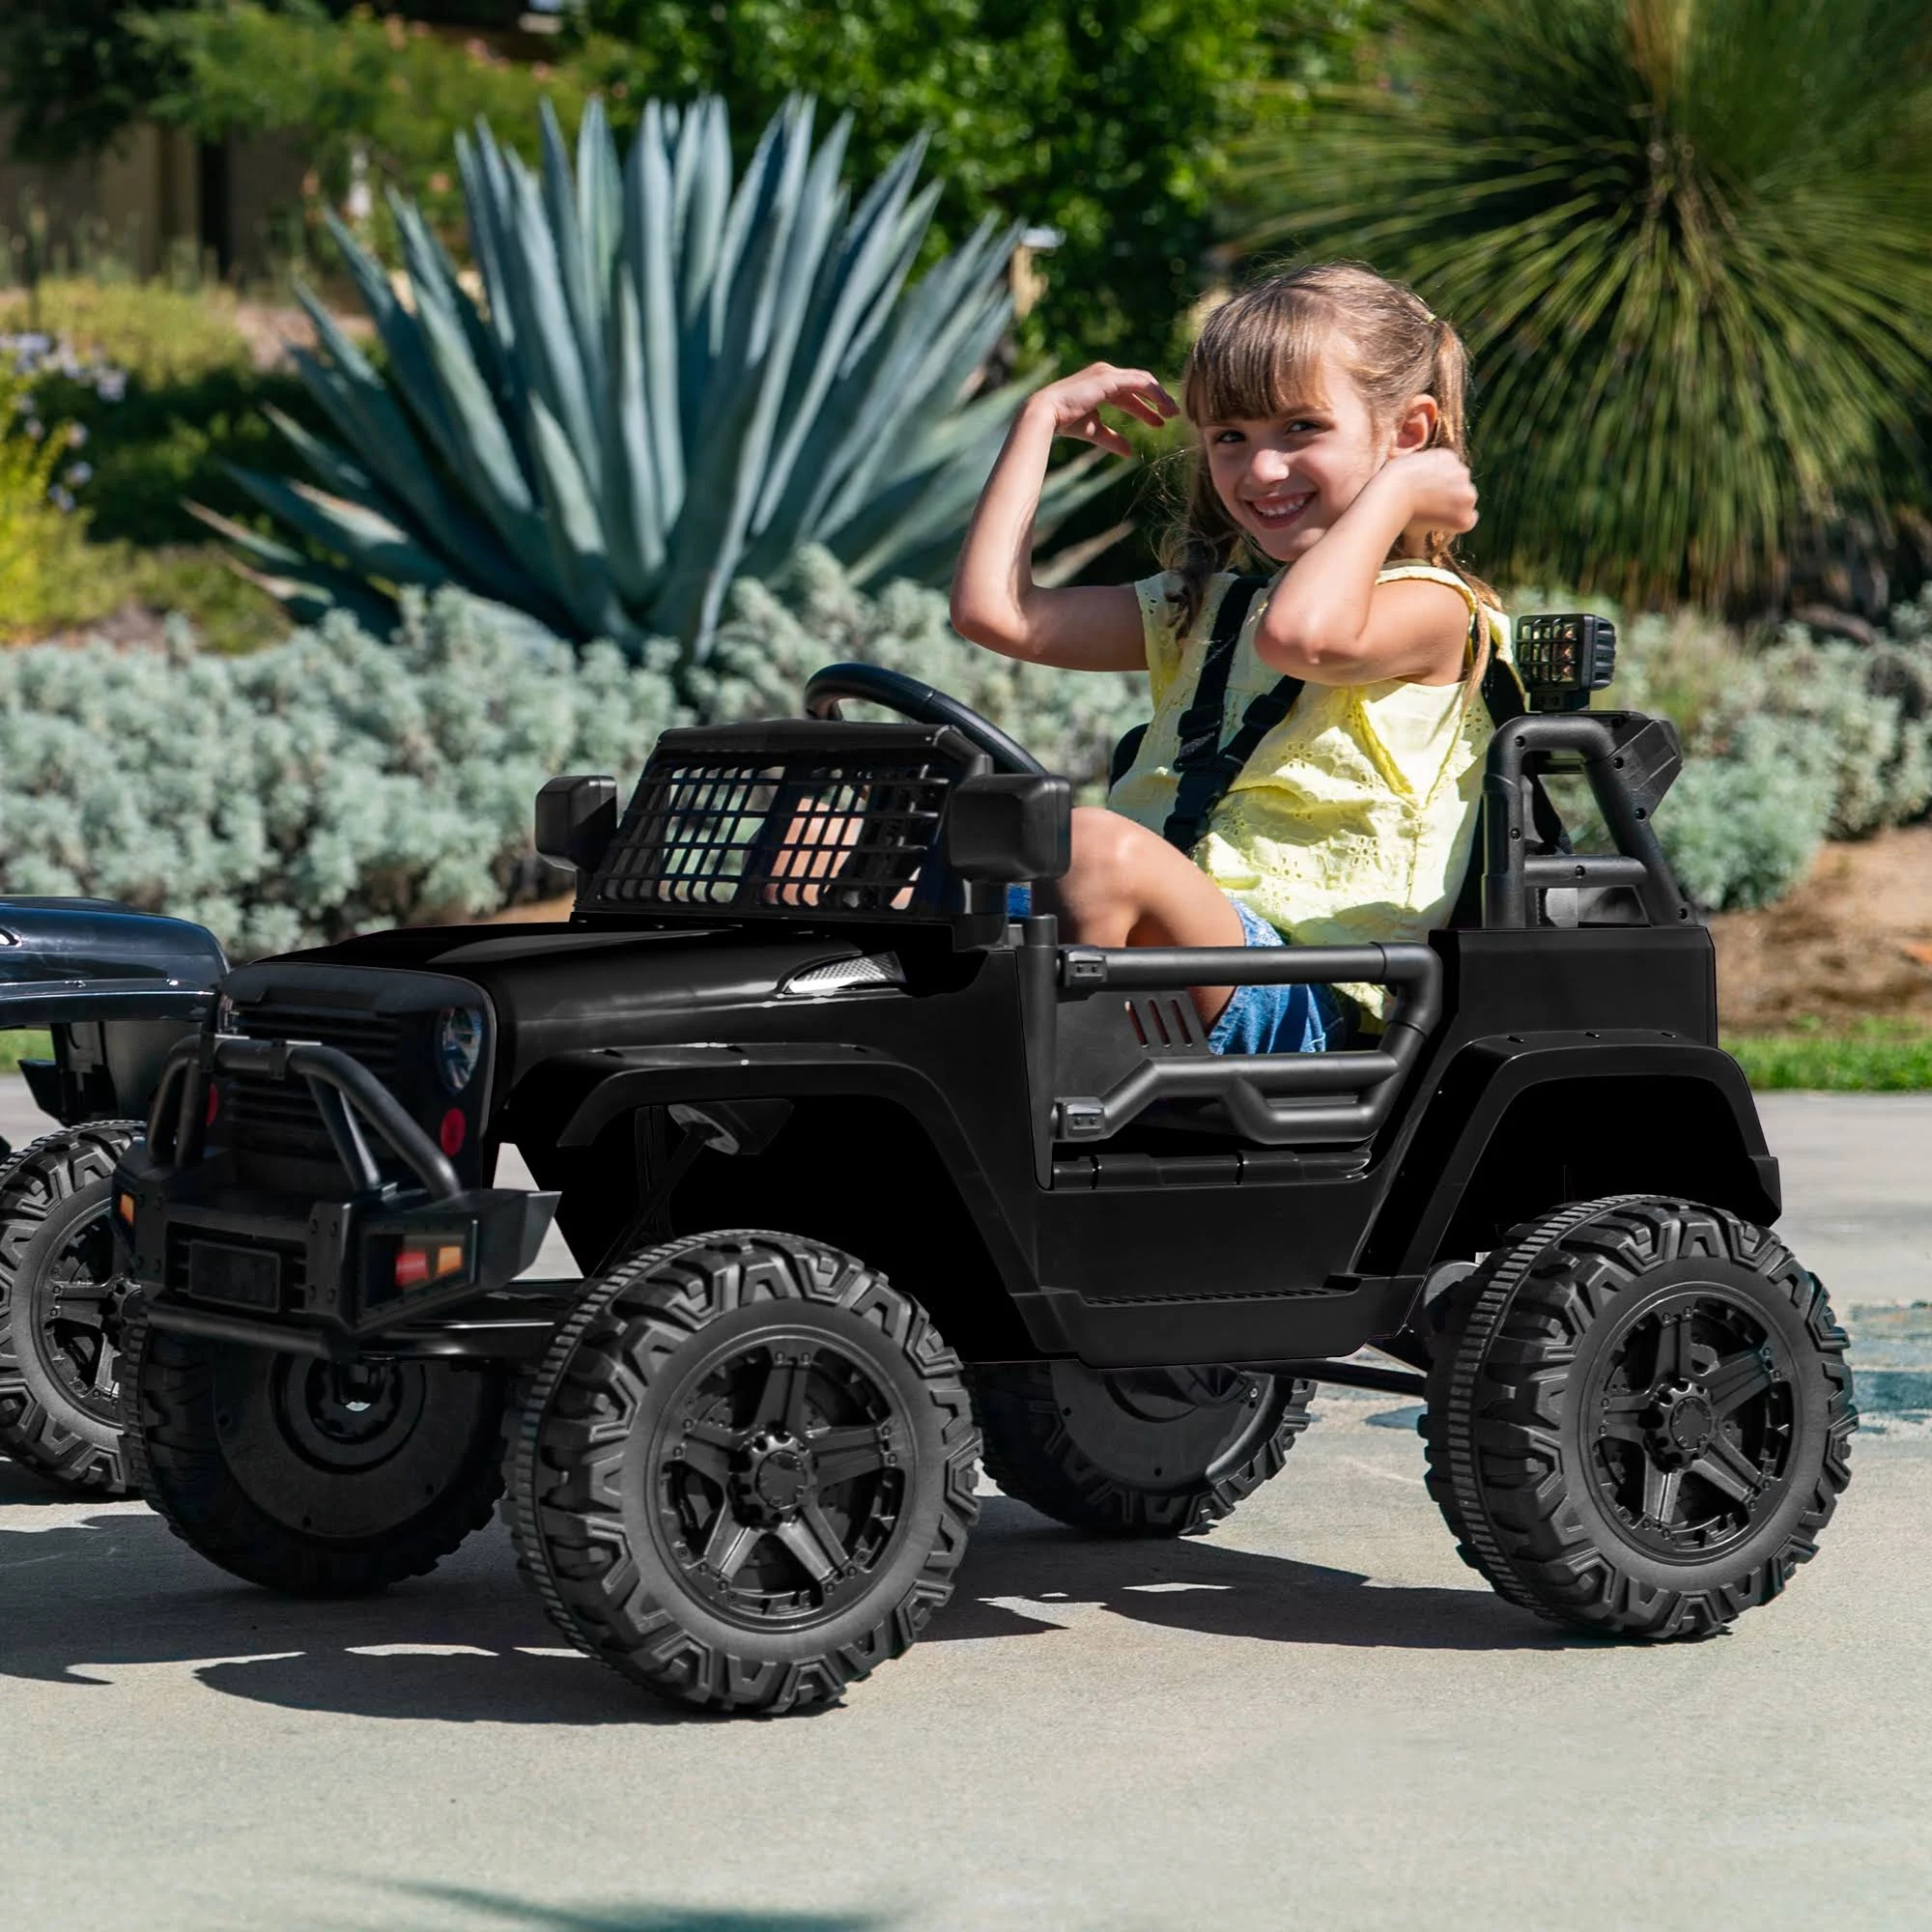 Best Choice Products 12V Kids Ride On Truck Car with Parent Remote Control, Spring Suspension, LED Lights Black